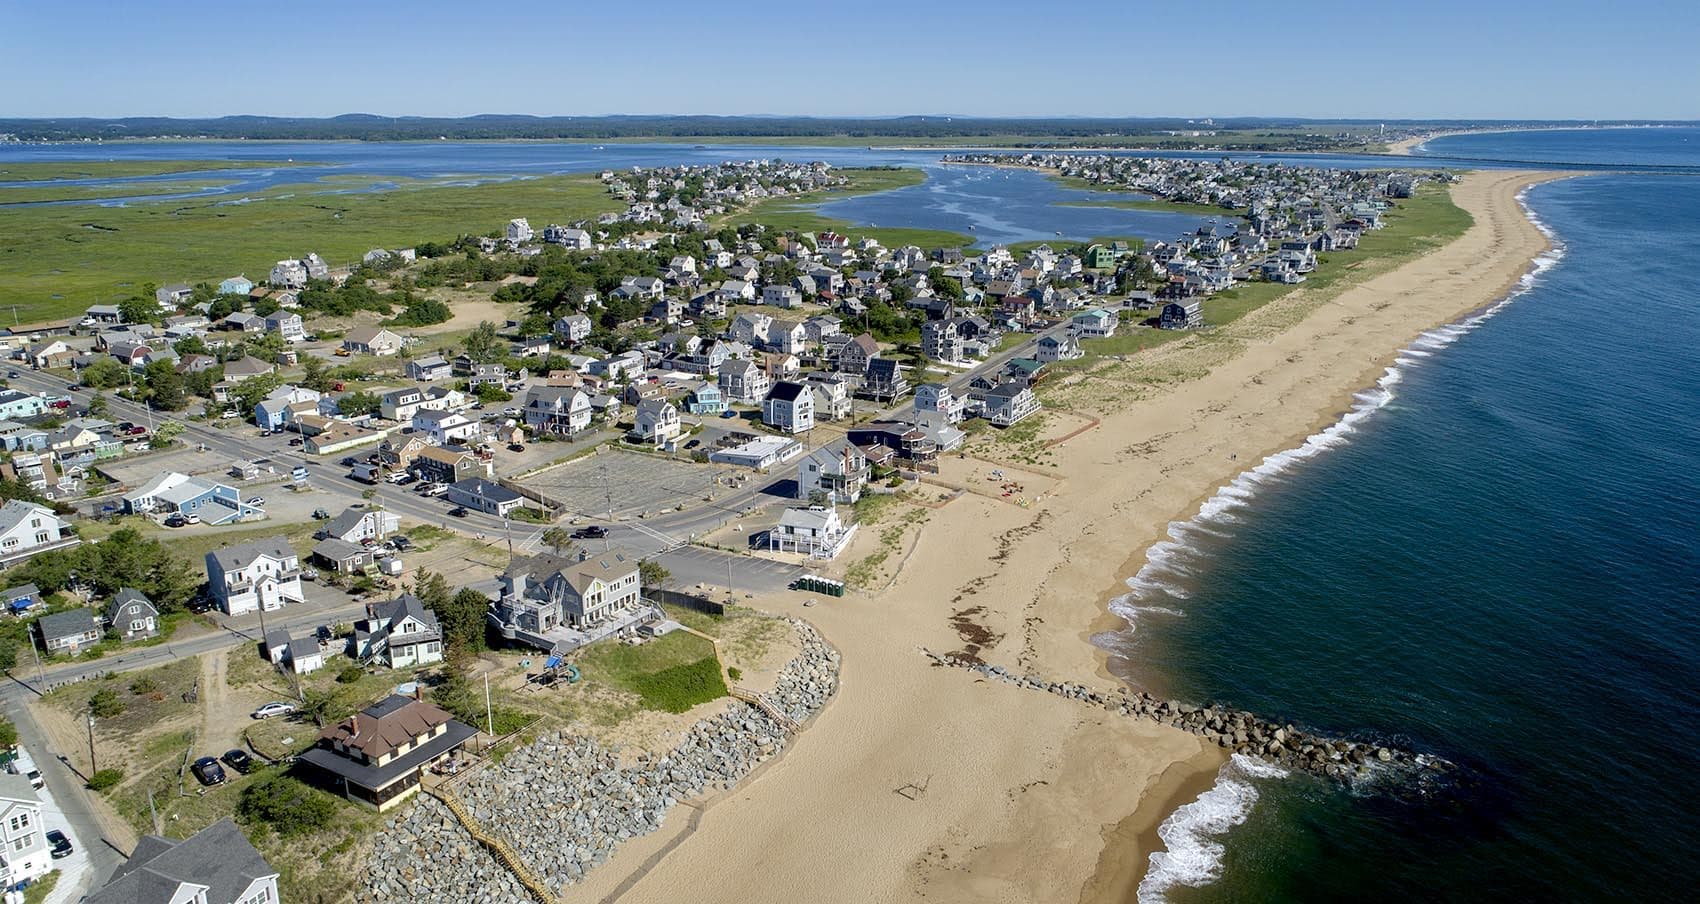 The north section of Plum Island lies between the Merrimack River estuary and the ocean. (Robin Lubbock/WBUR)